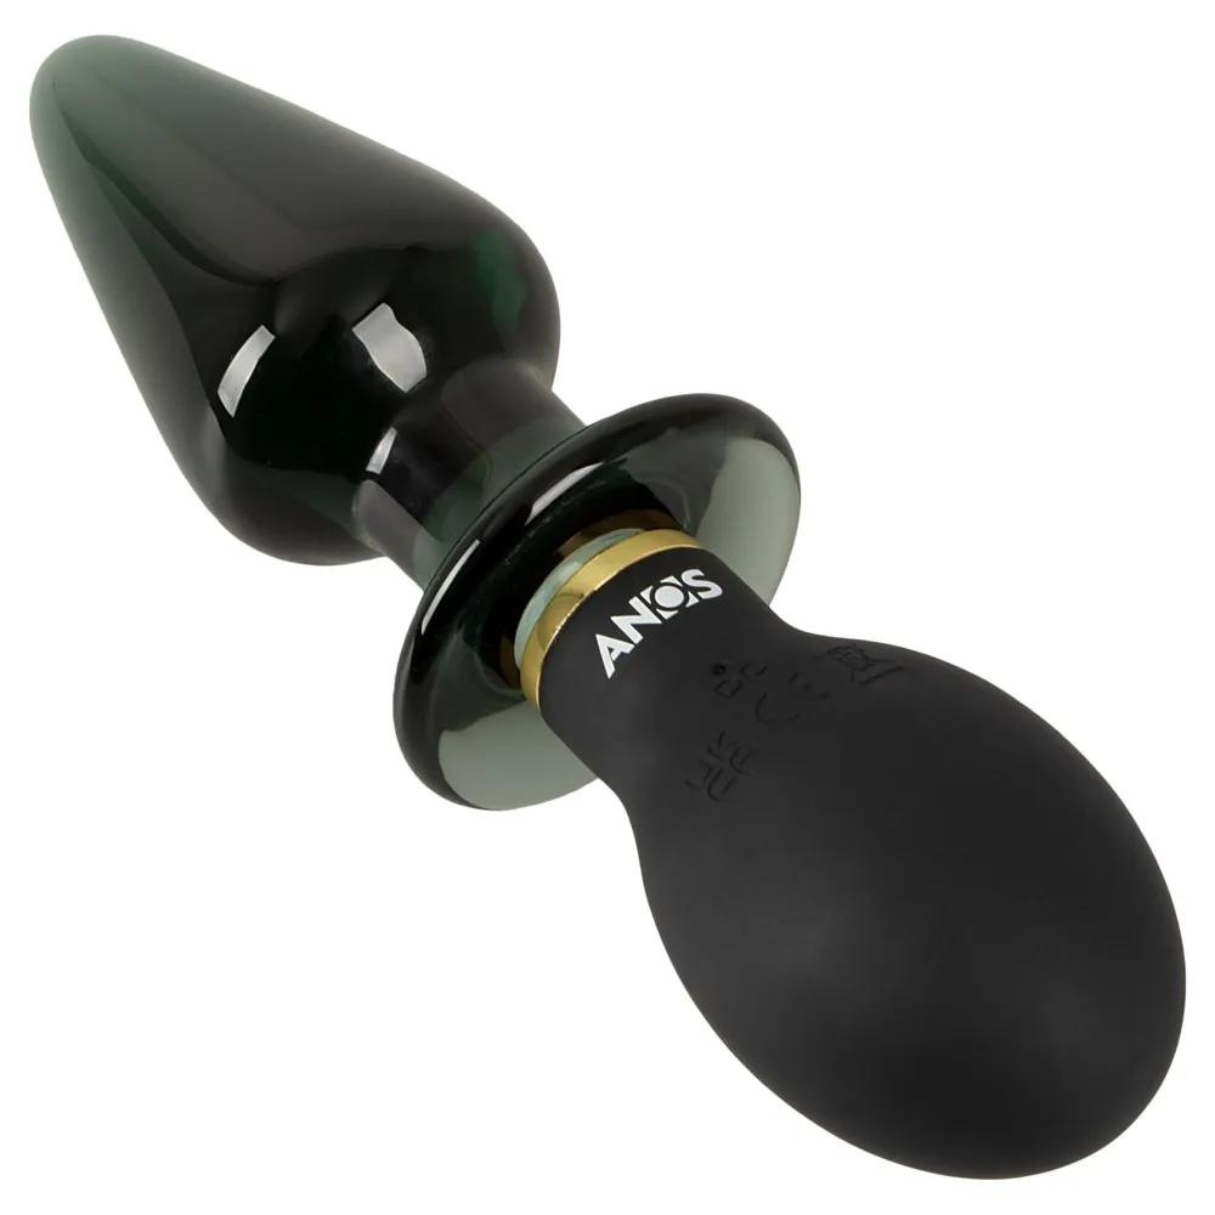 with ORION Plug Butt Vibration Double-ended Vibrator